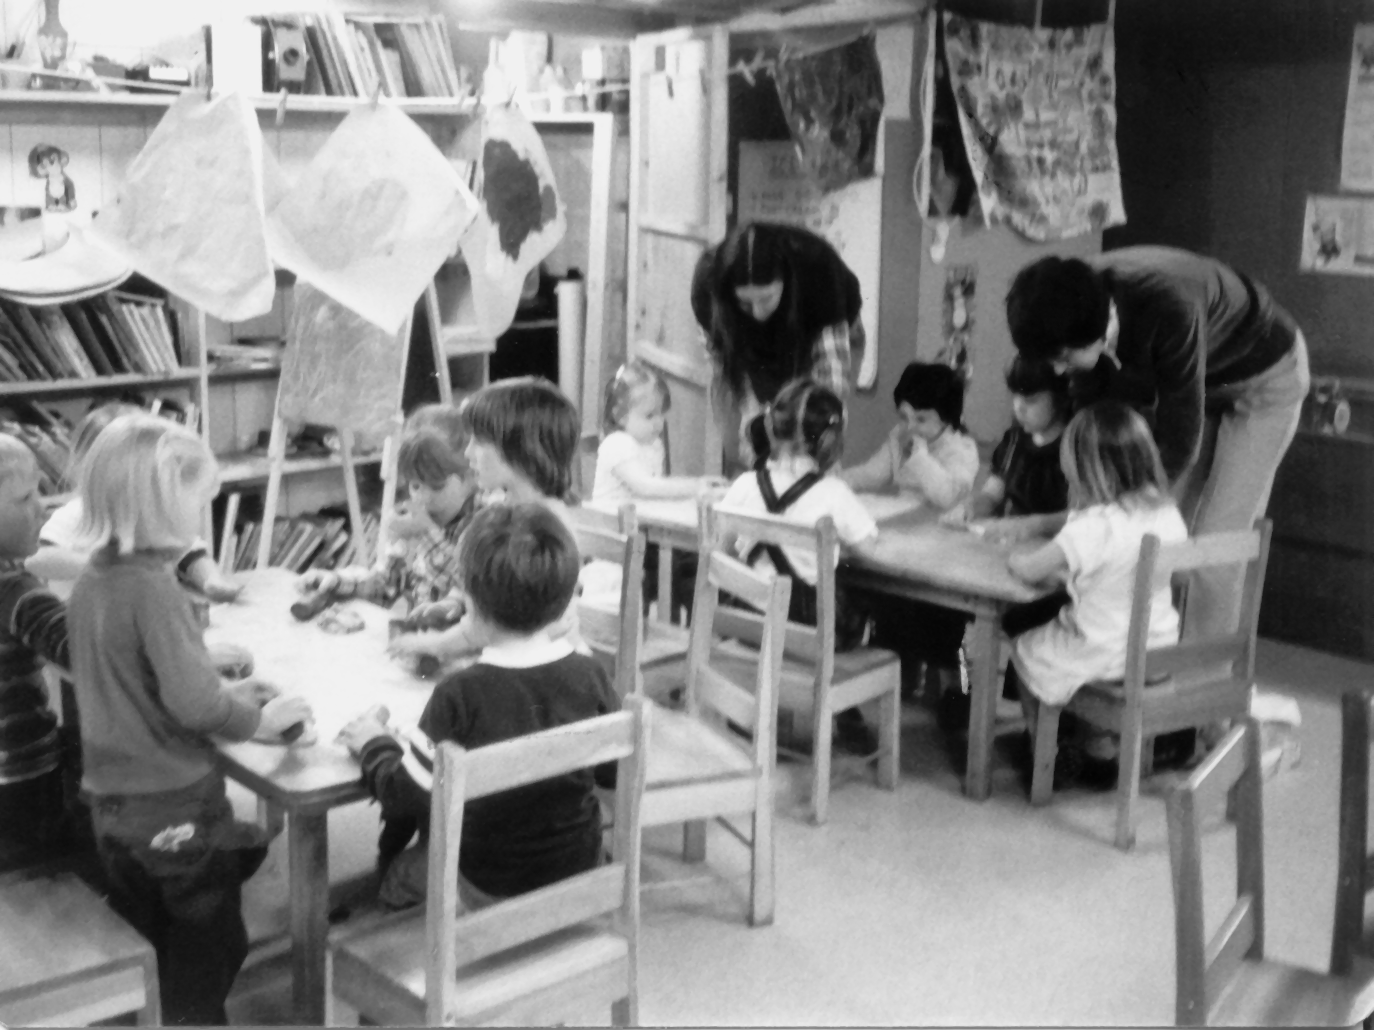 A black and white photo of students and adults working on an art project